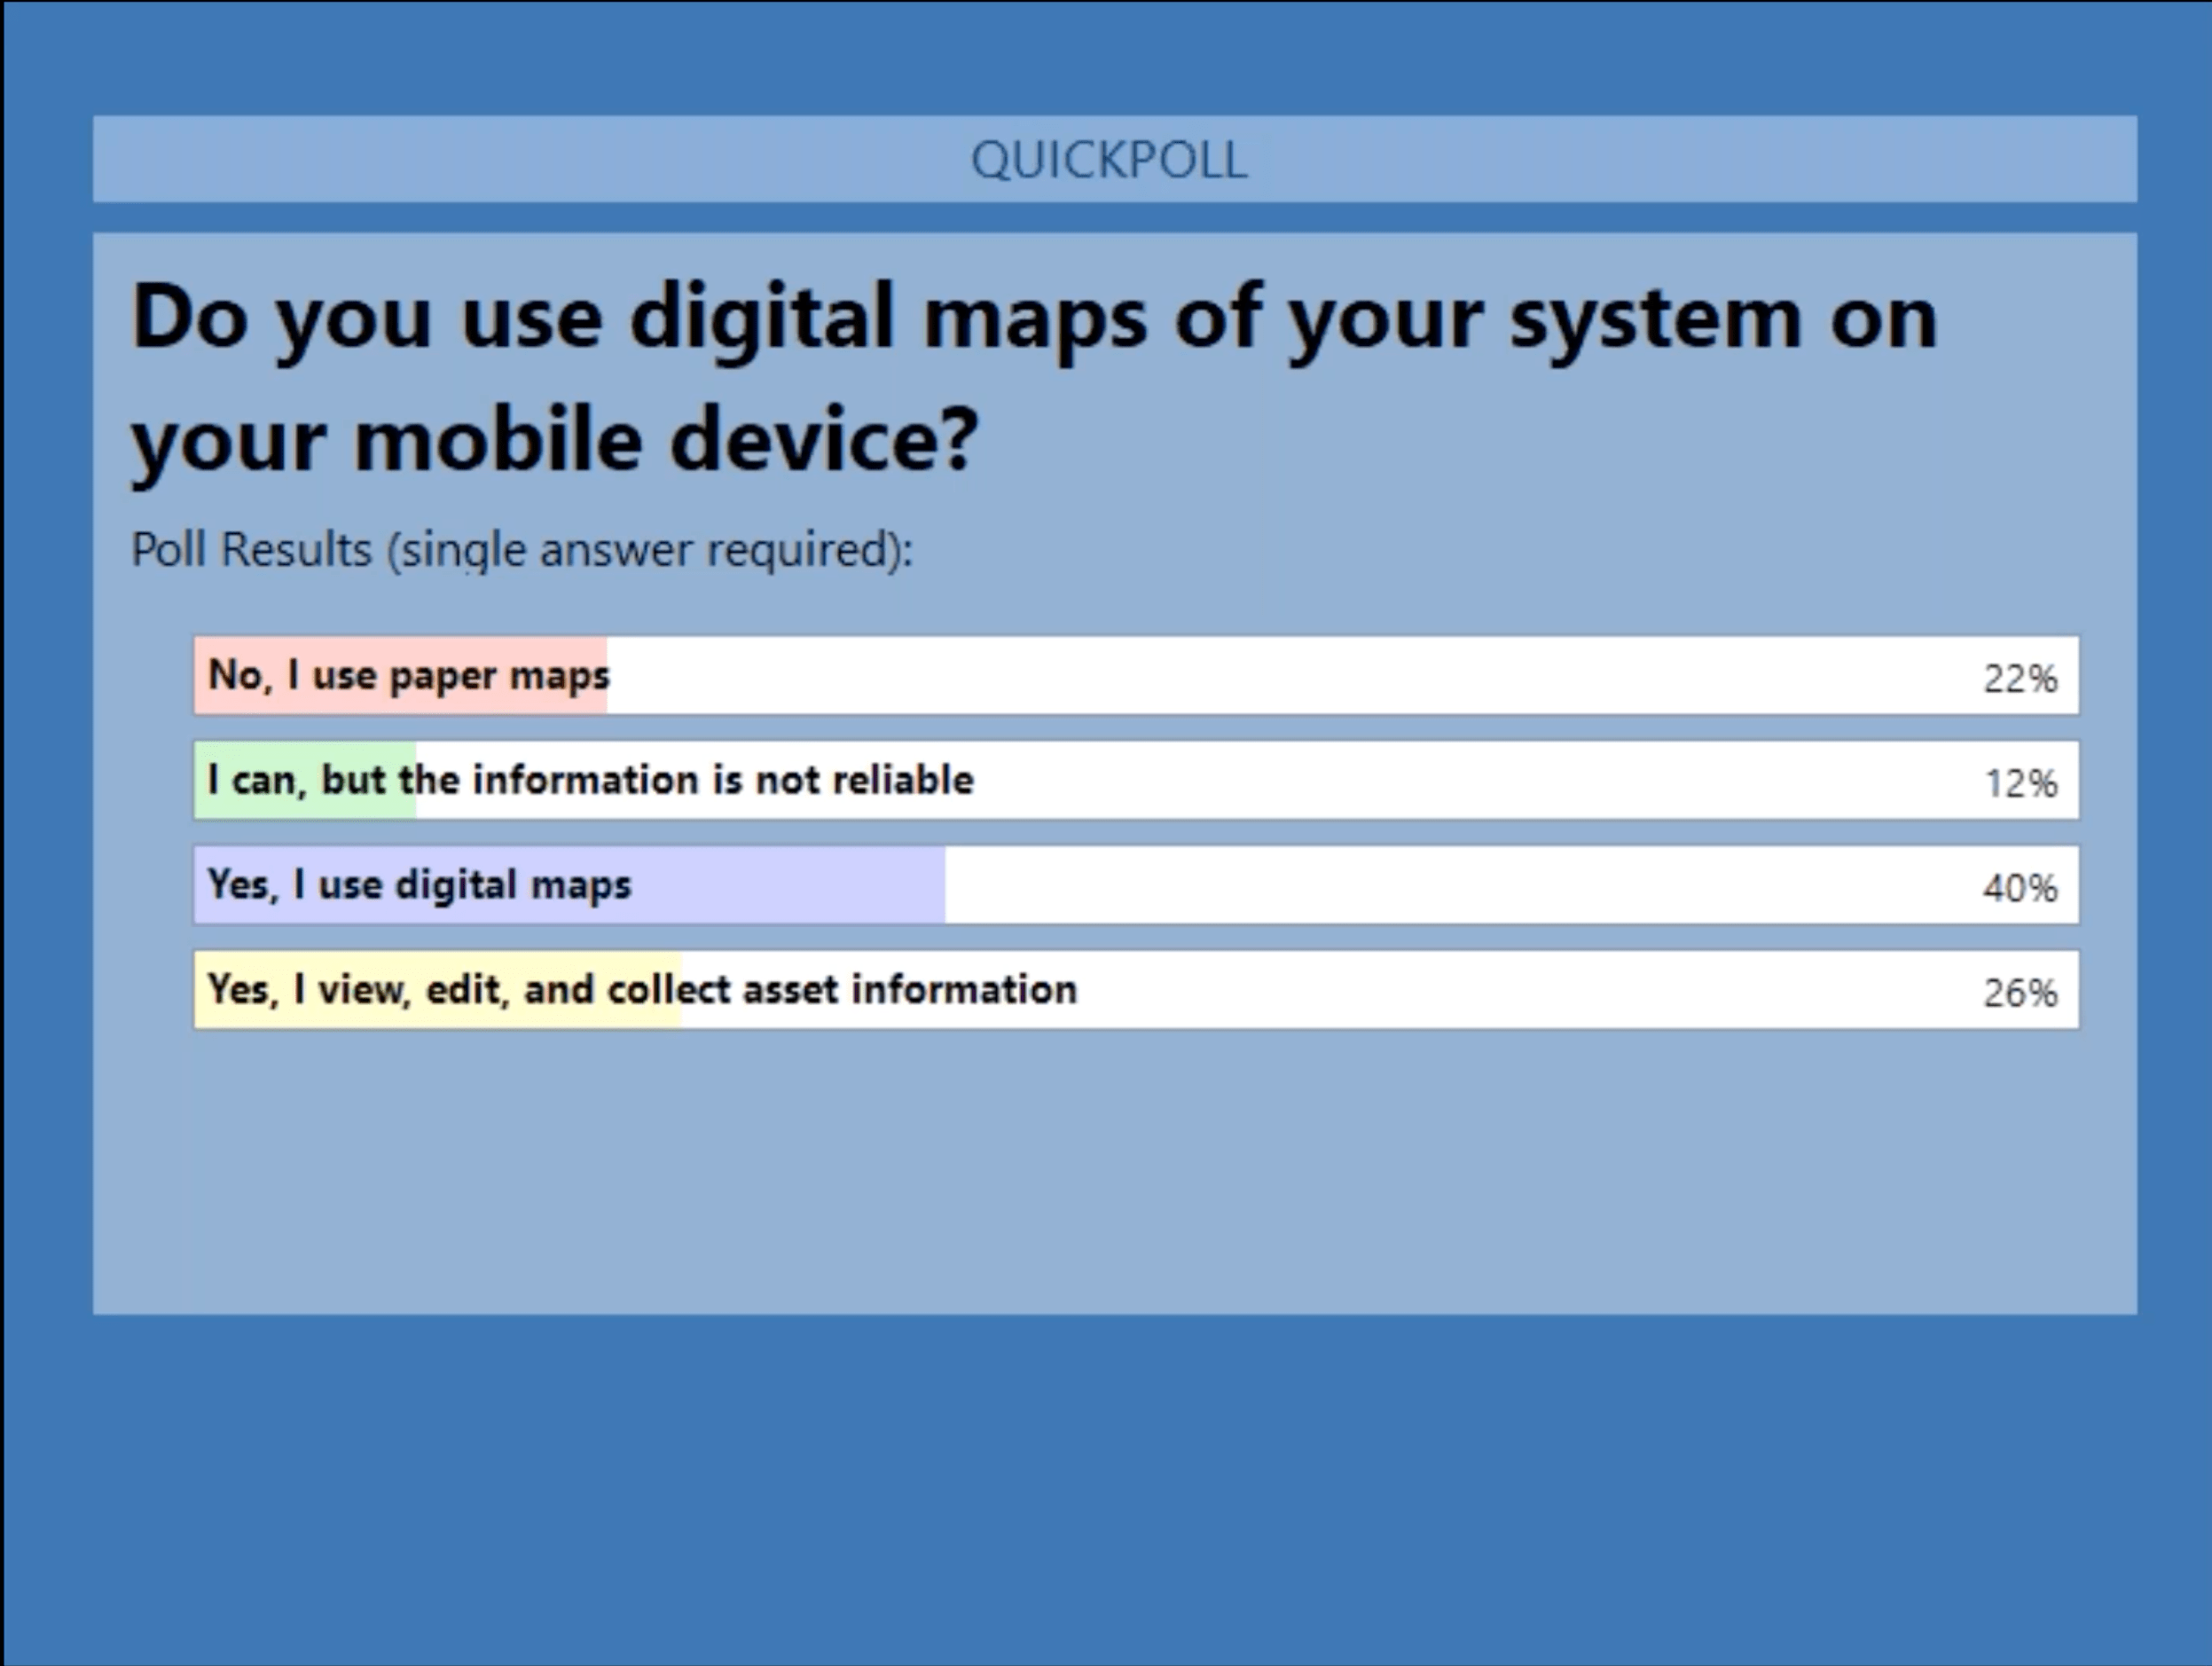 NRWA Eos Webinar Poll; "Do you use digital maps of your system on your mobile device?"